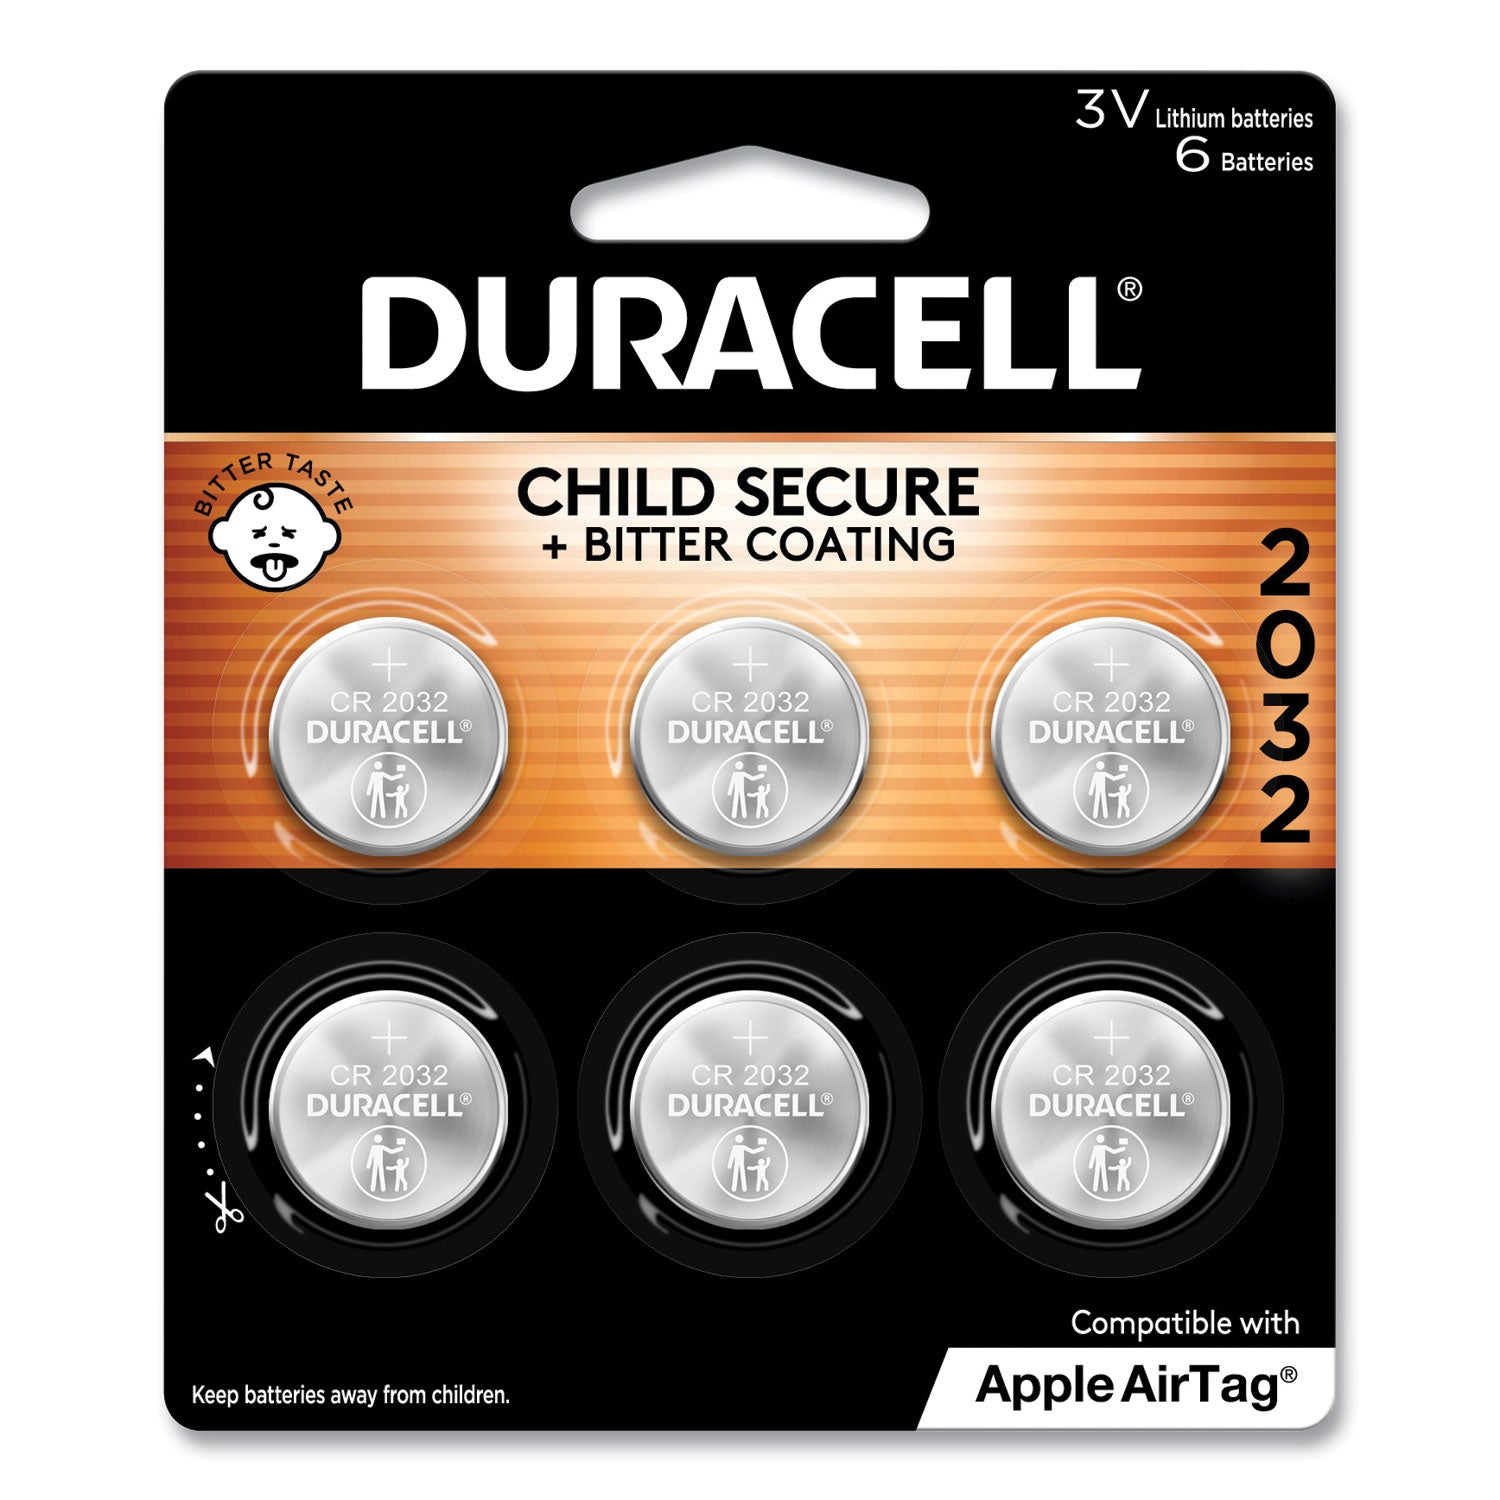 lithium-coin-batteries-with-bitterant-2032-6-pack_durdl2032b6pk - 1